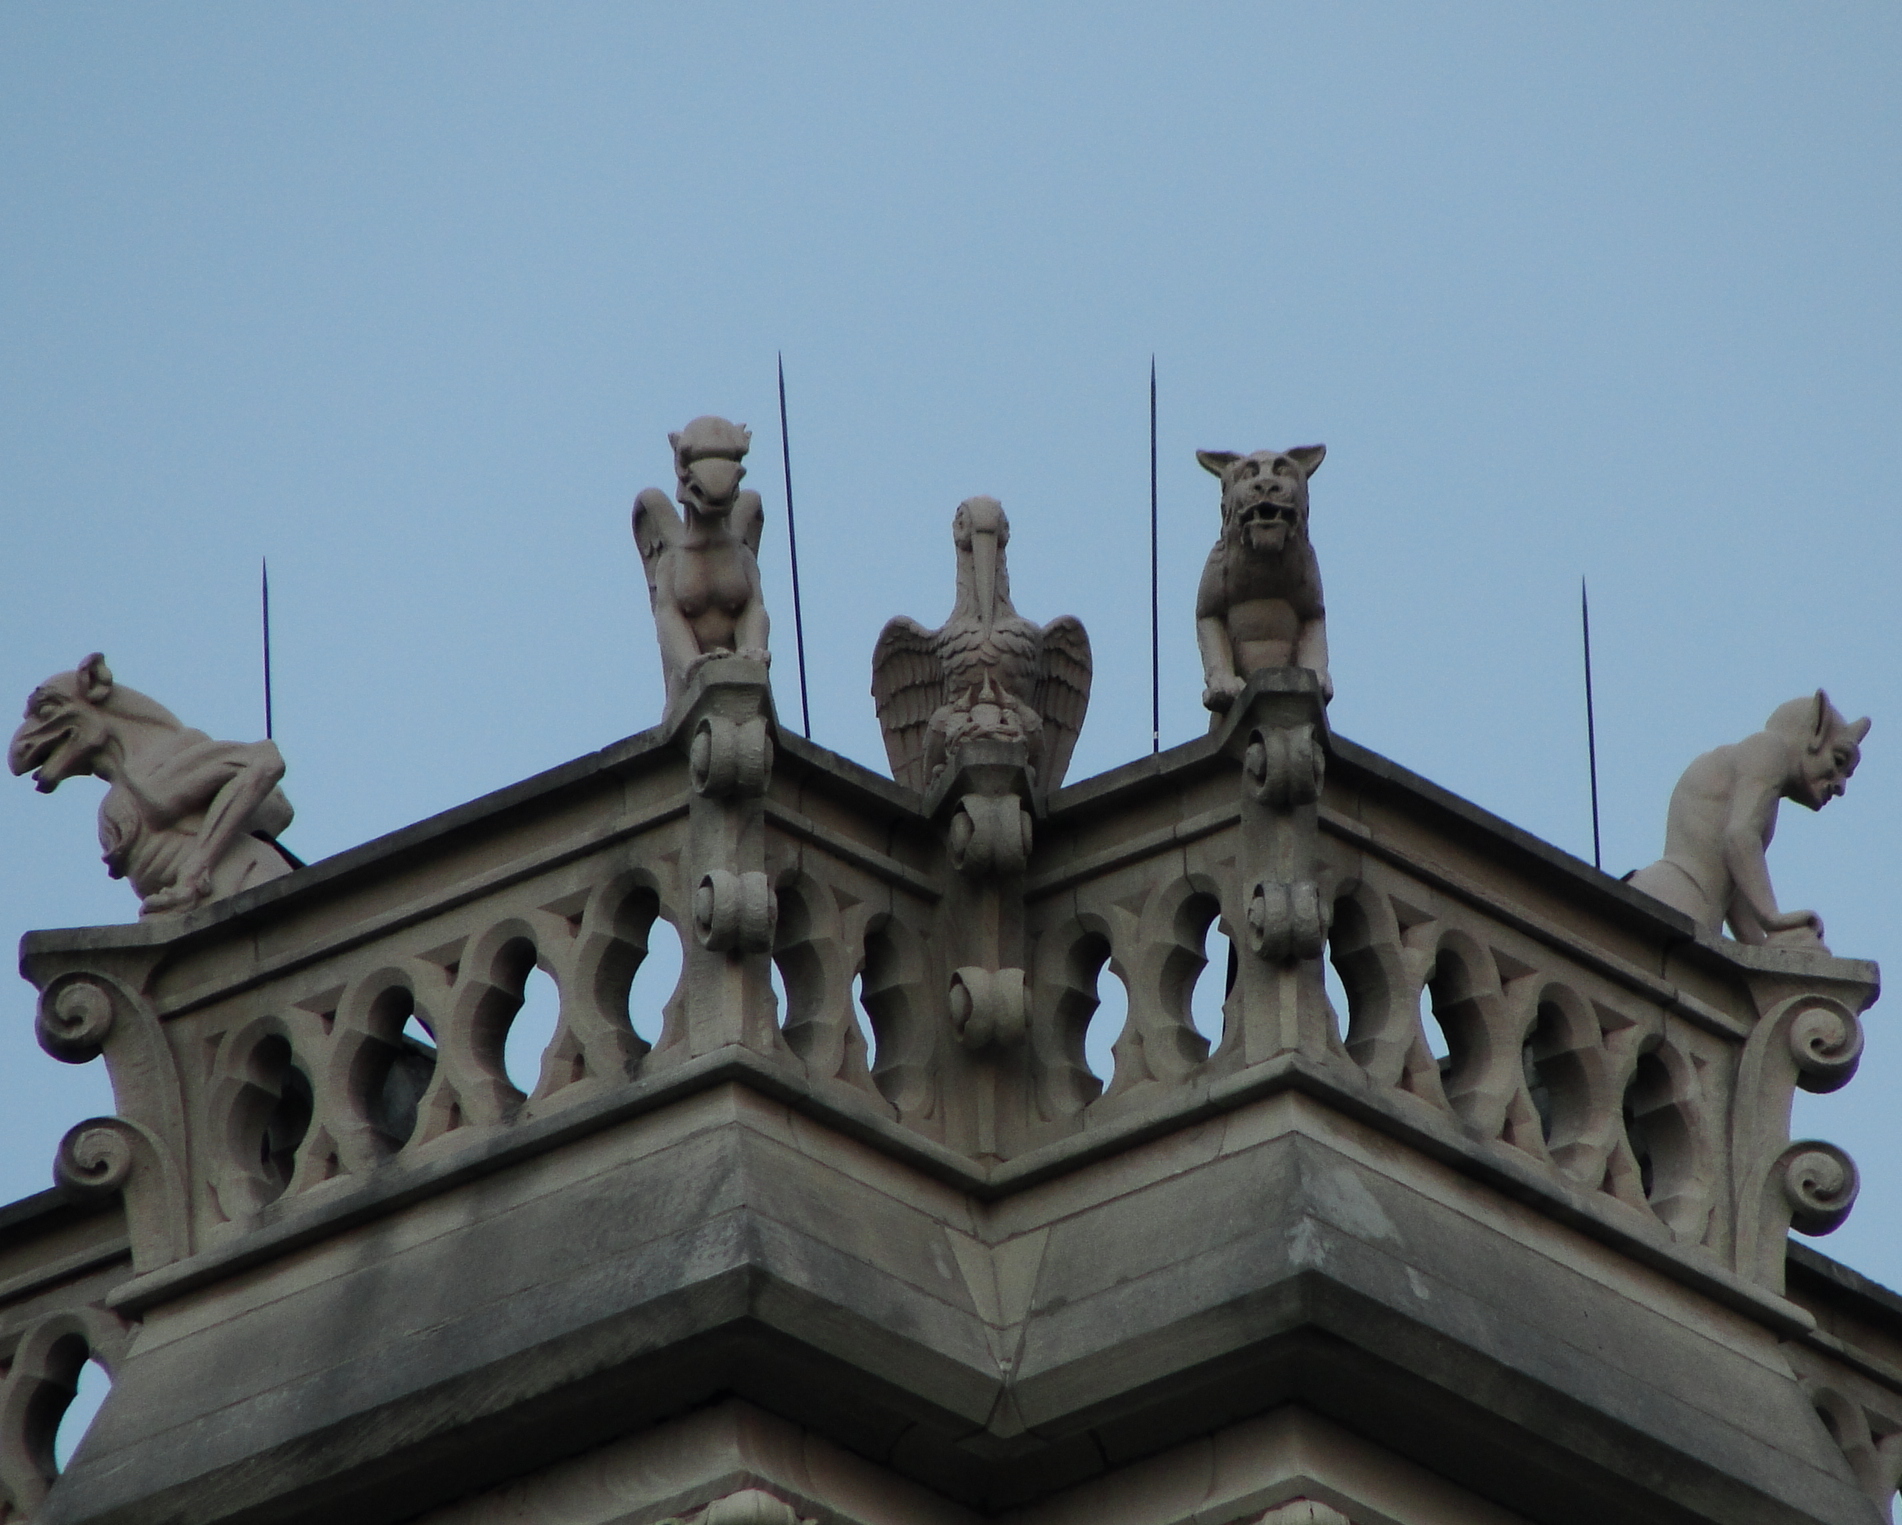 gargoyles atop The Cathedral Basilica of the Assumption in Covington, KY.  Twenty-six gargoyles to be exact, all carved in Italy